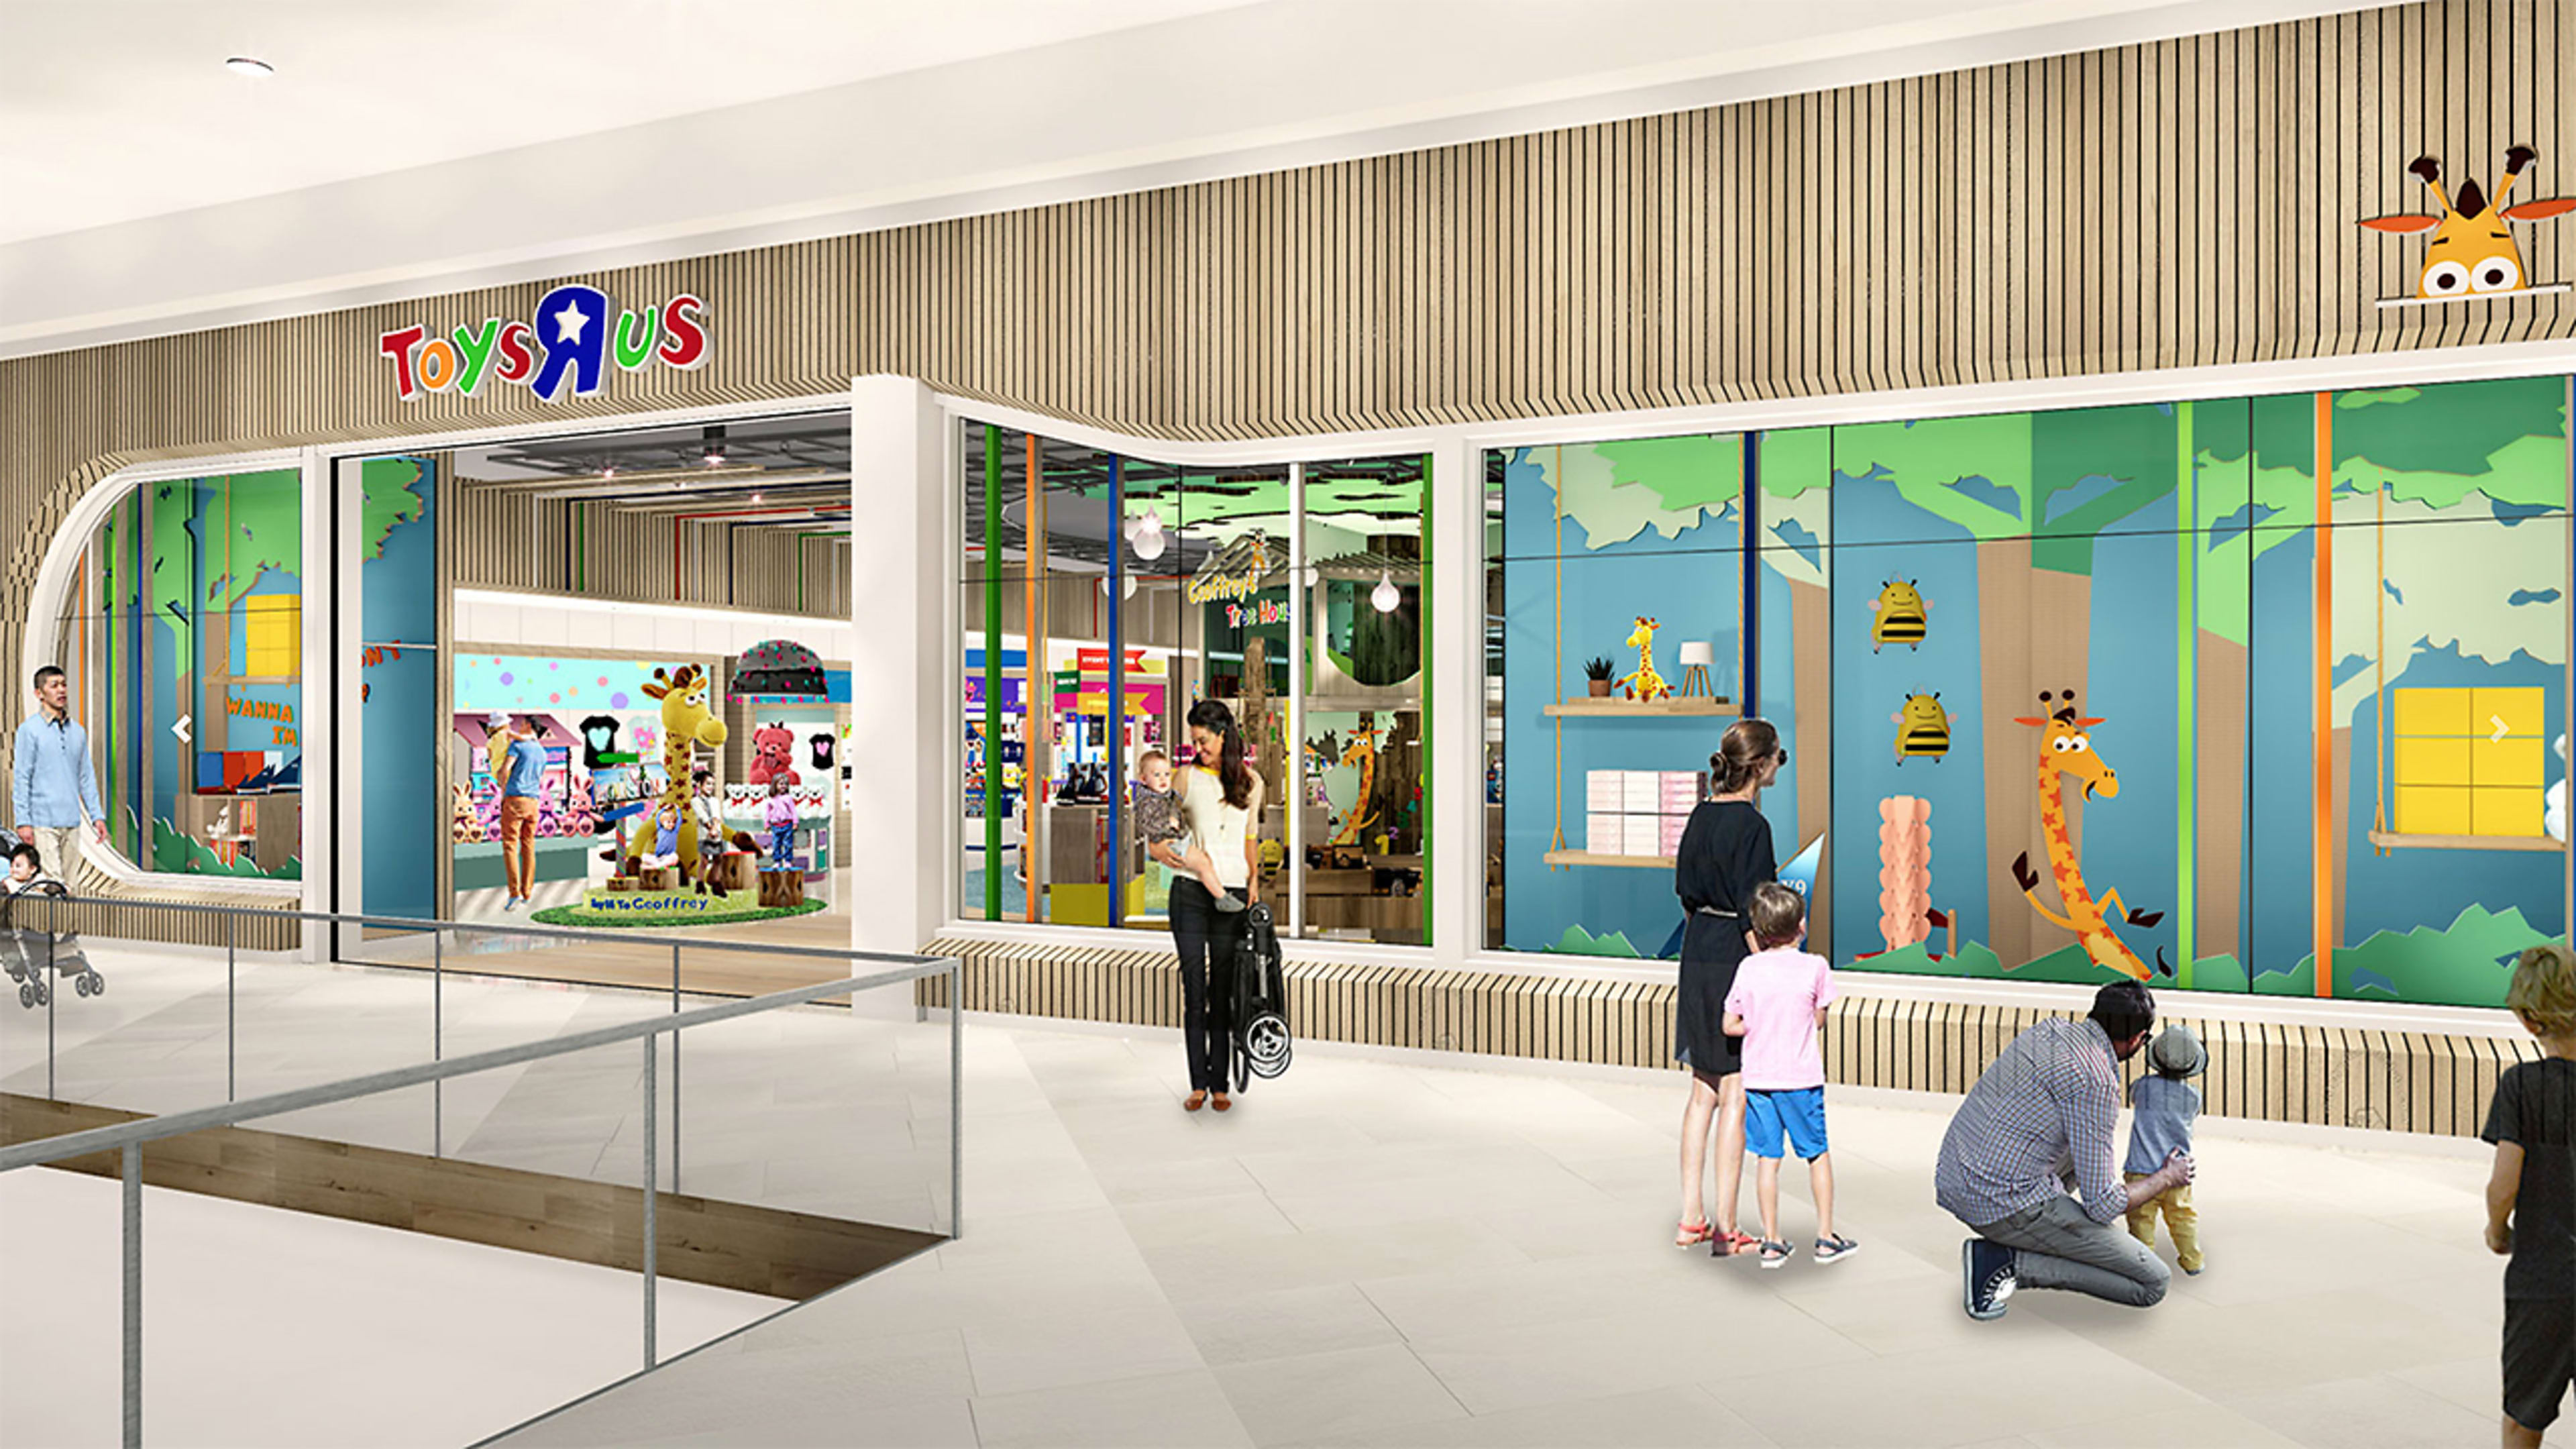 Toys ‘R’ Us is coming back with a high-tech twist